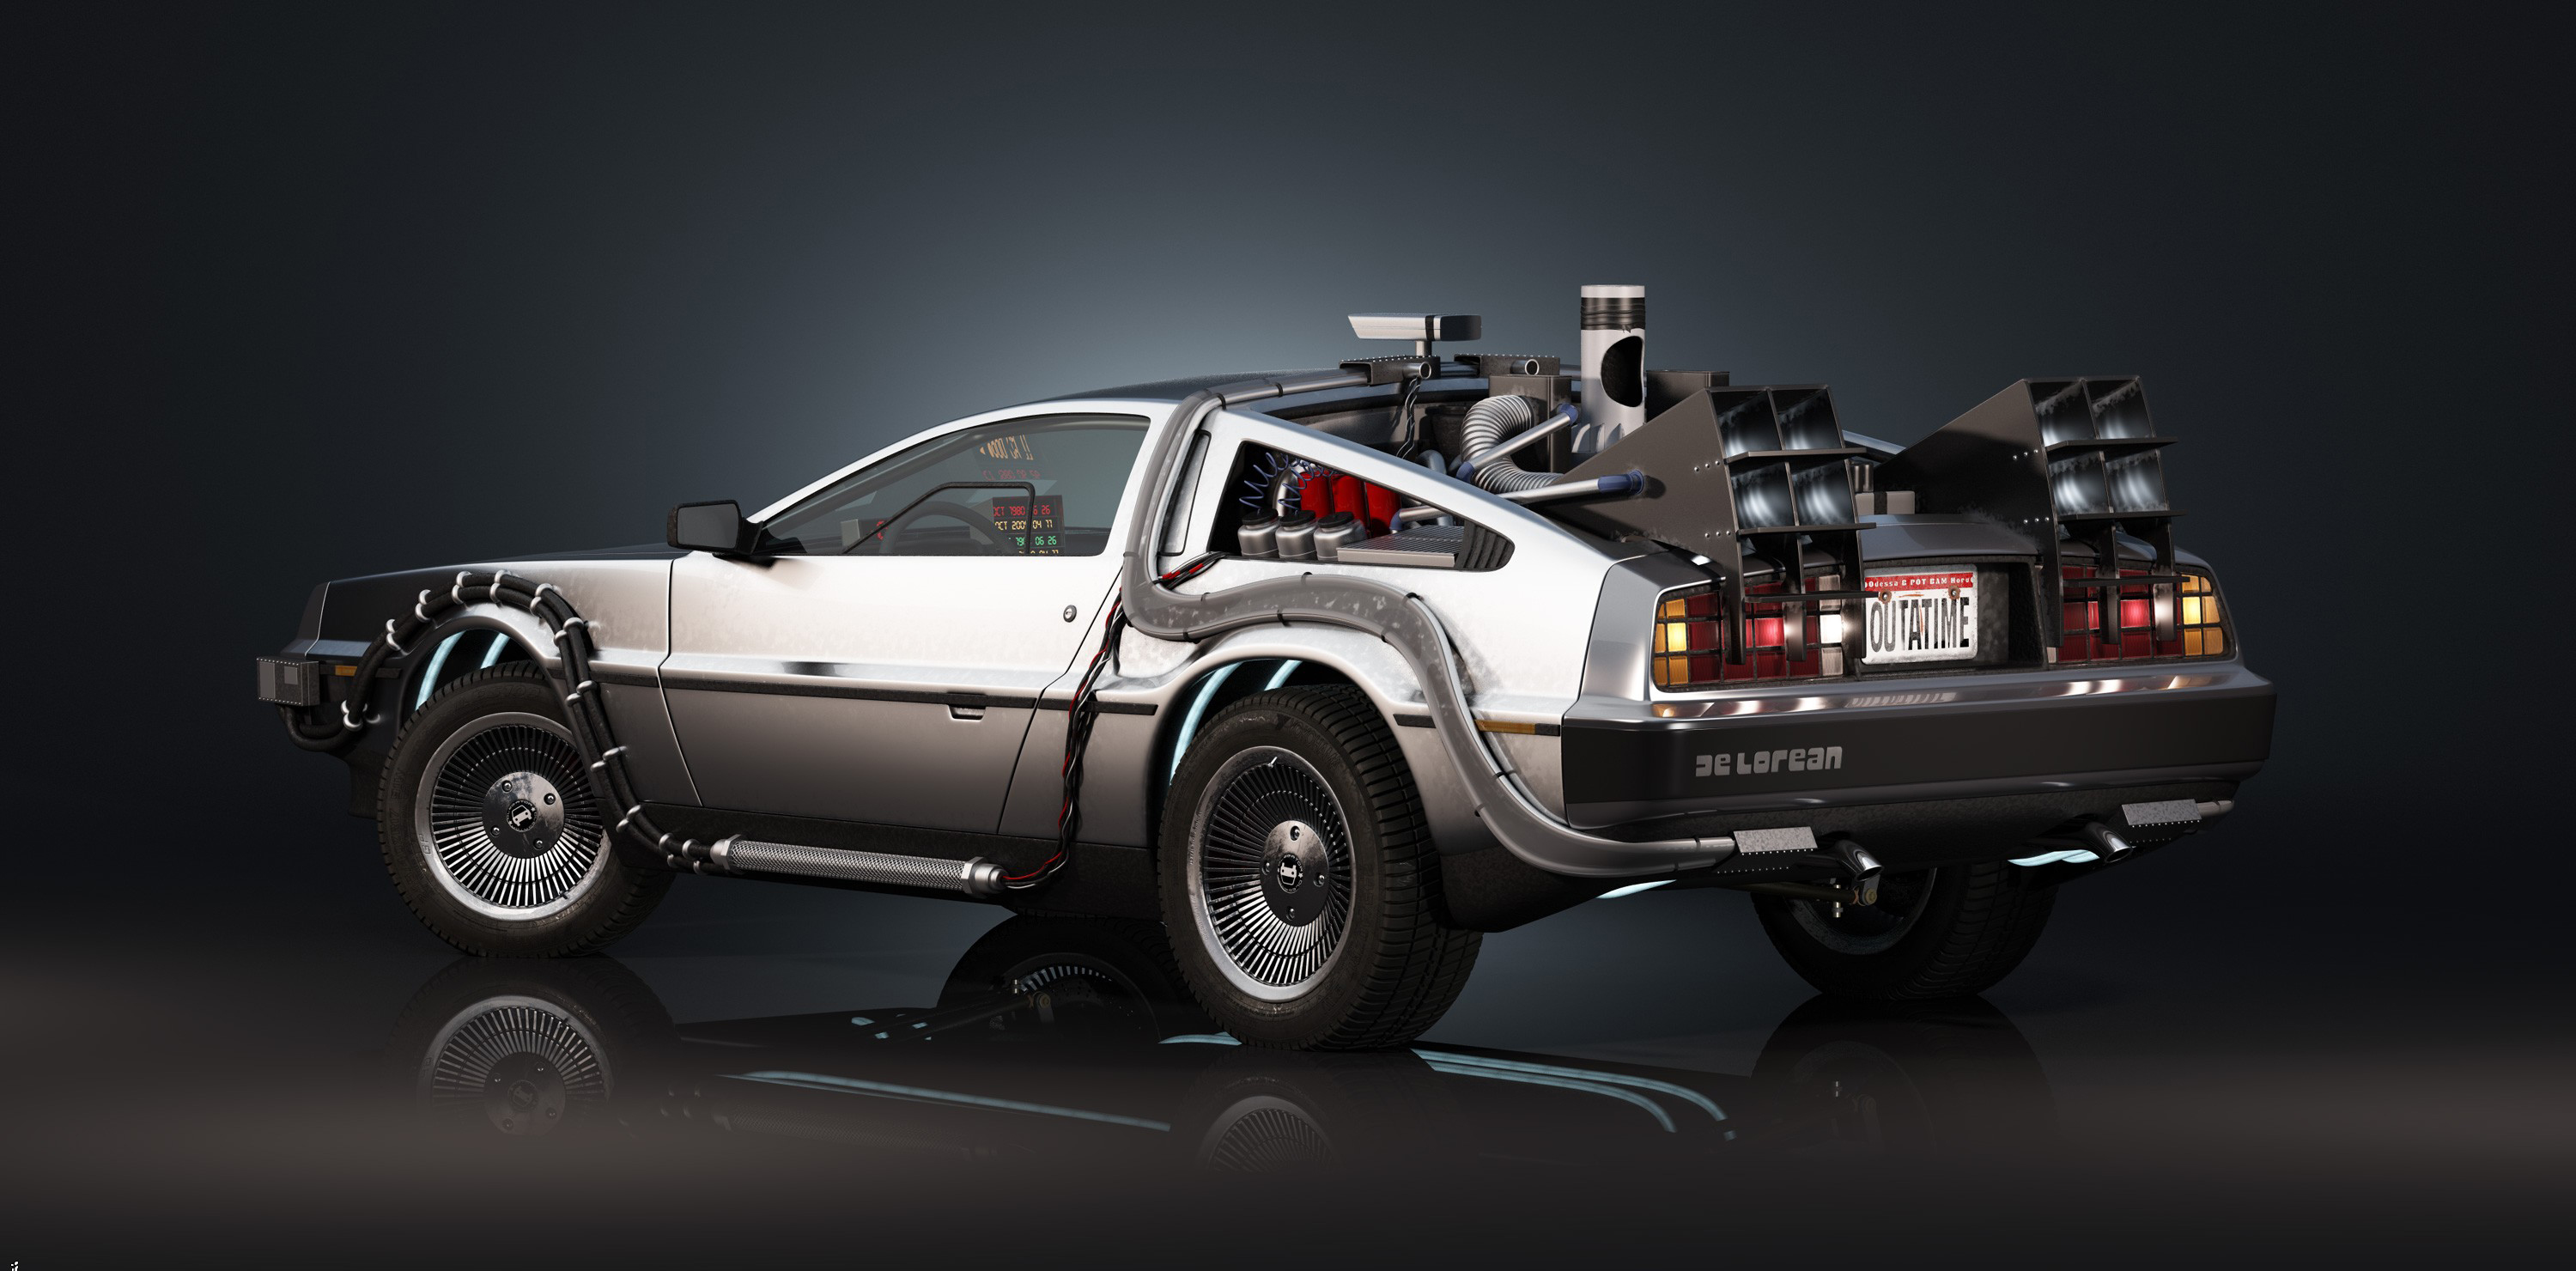 Back To The Future 4 Car - HD Wallpaper 